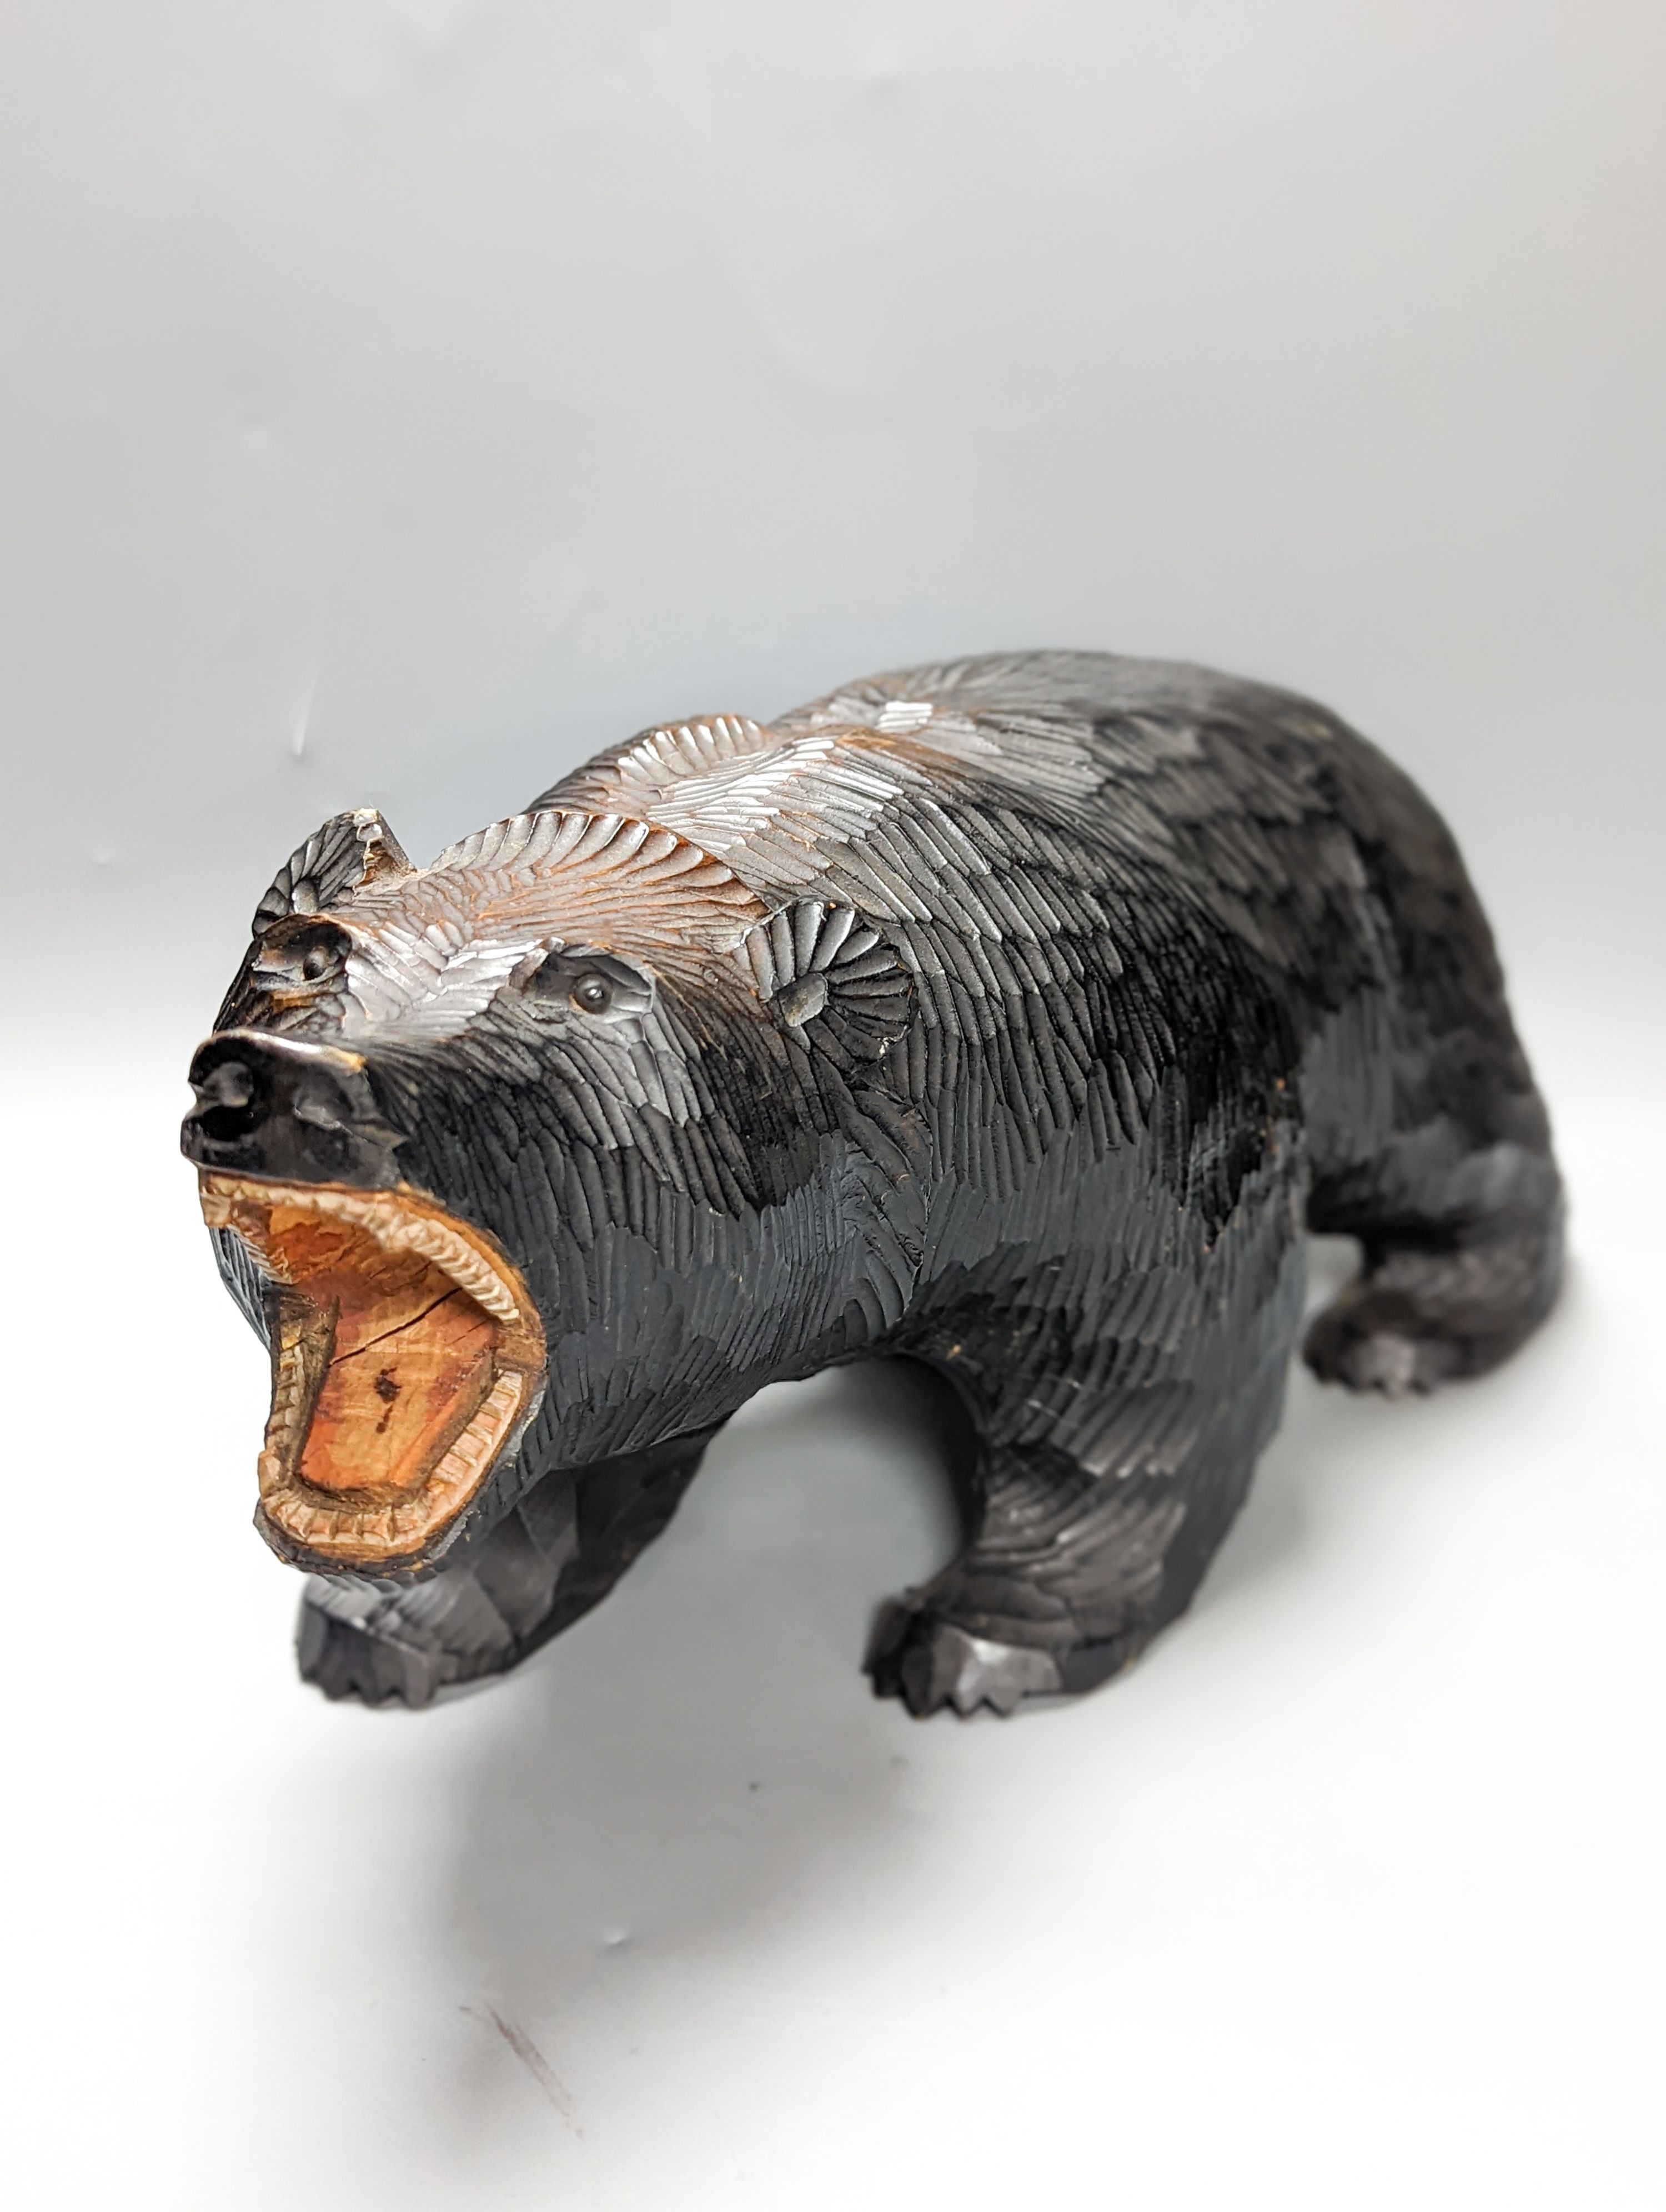 A Black Forest style carved bear 45cm